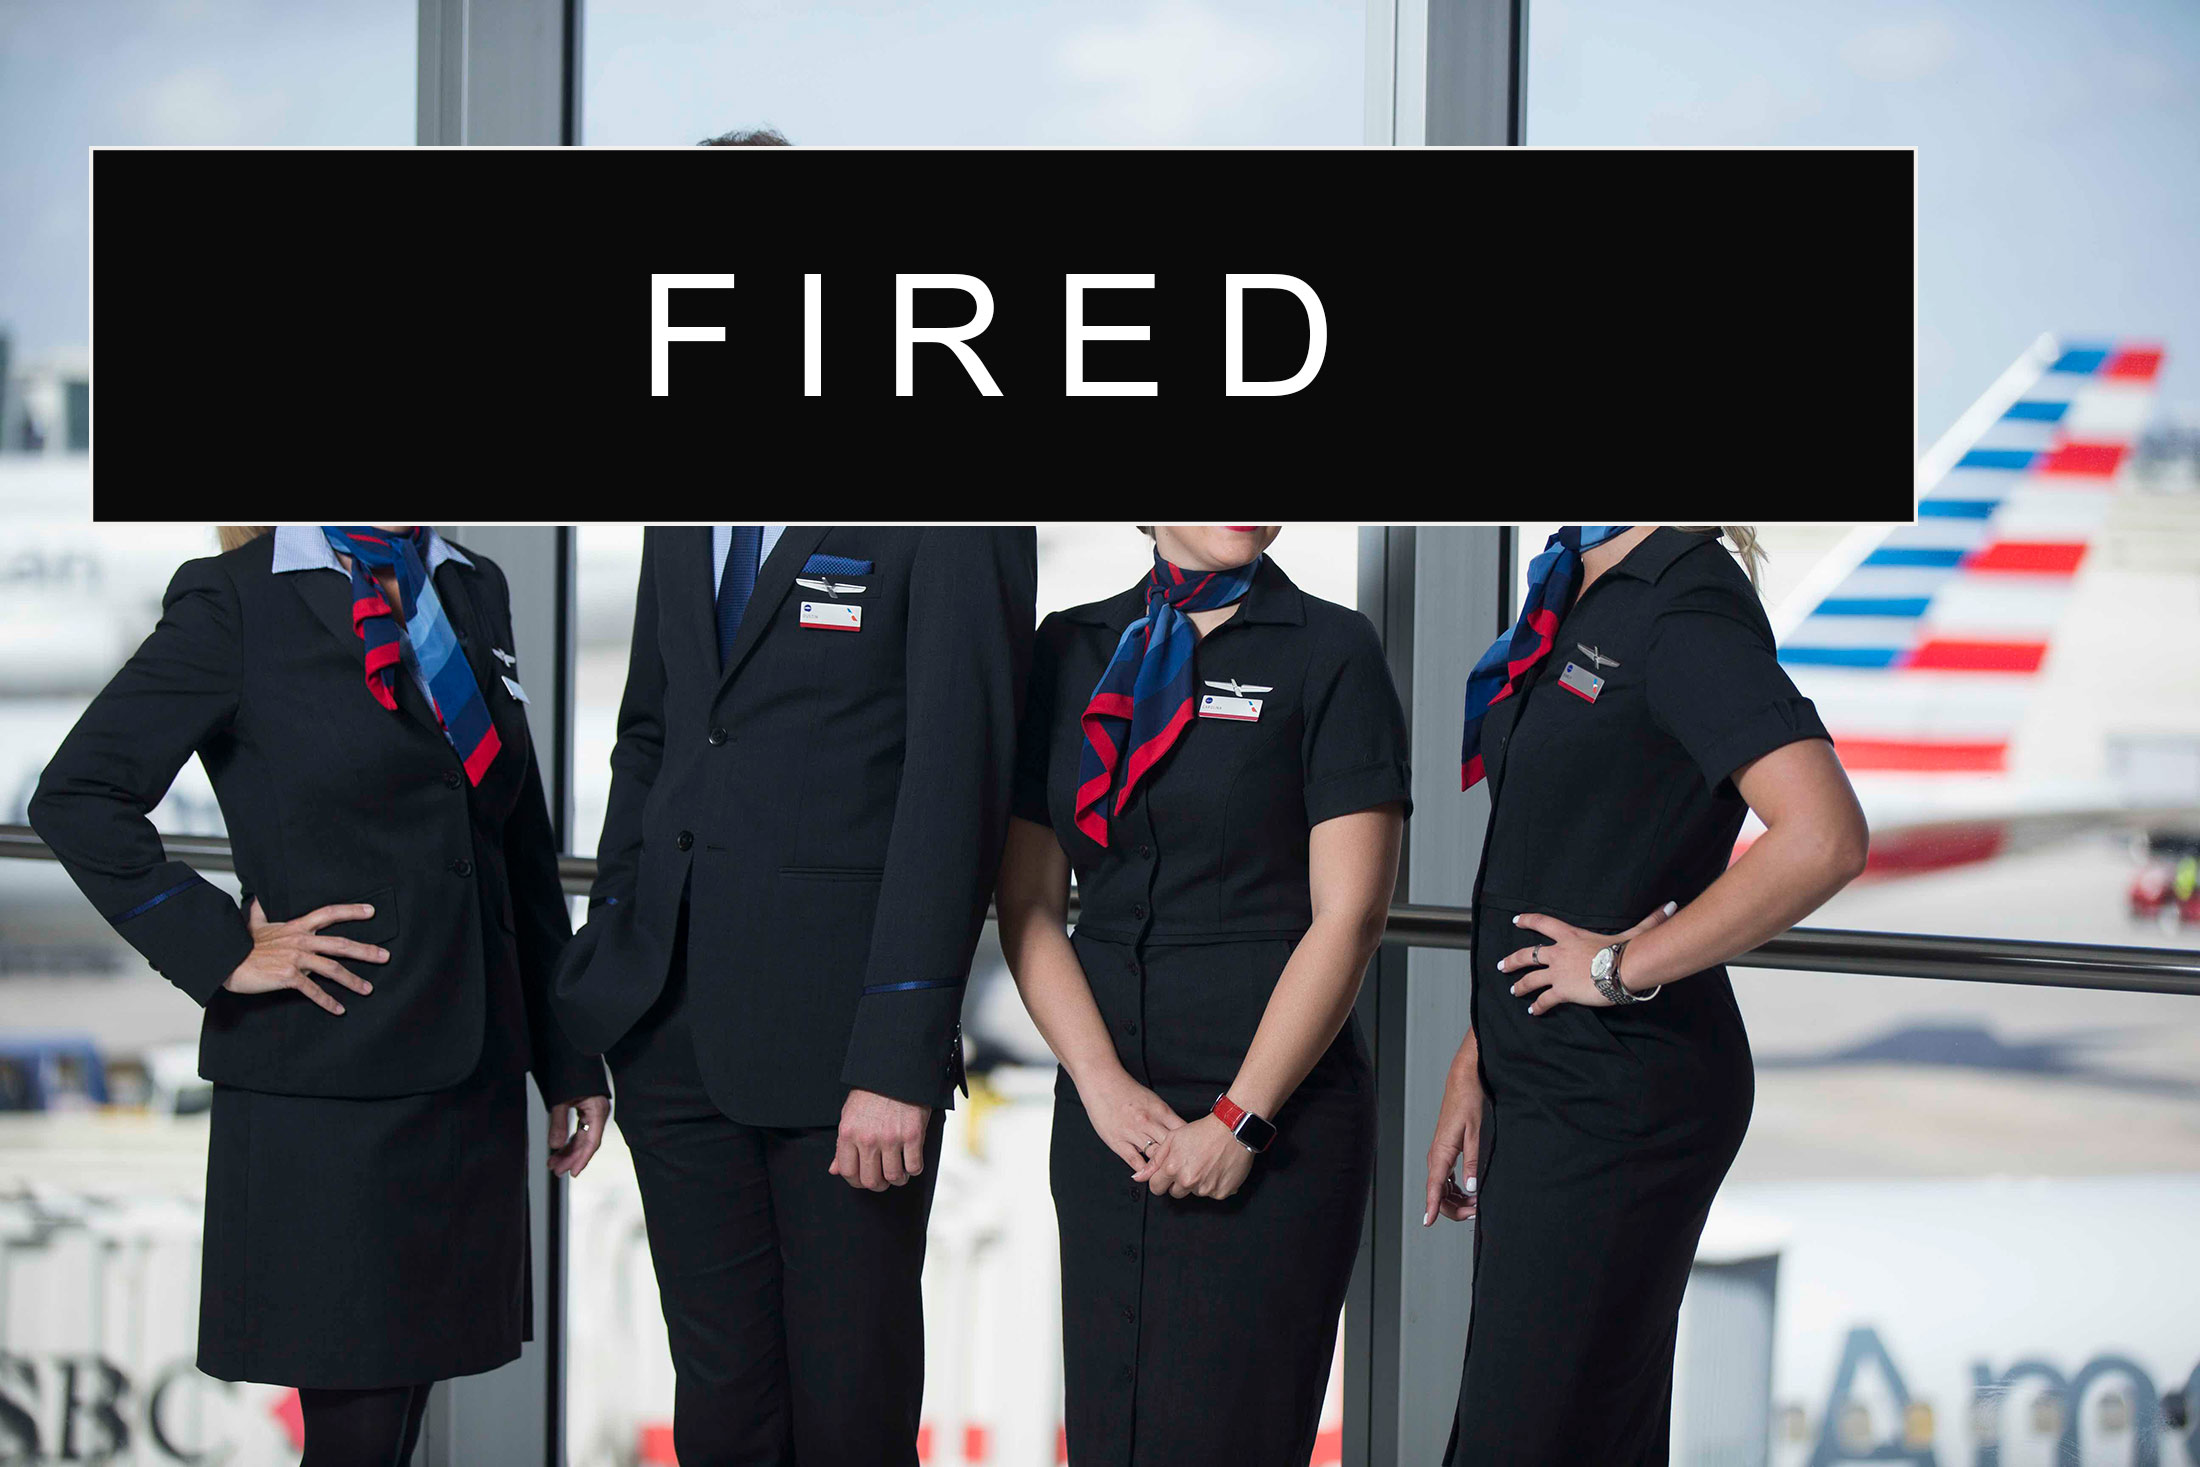 Ouch: American Airlines Fires 50 Flight Attendants For Dereliction Of Duty